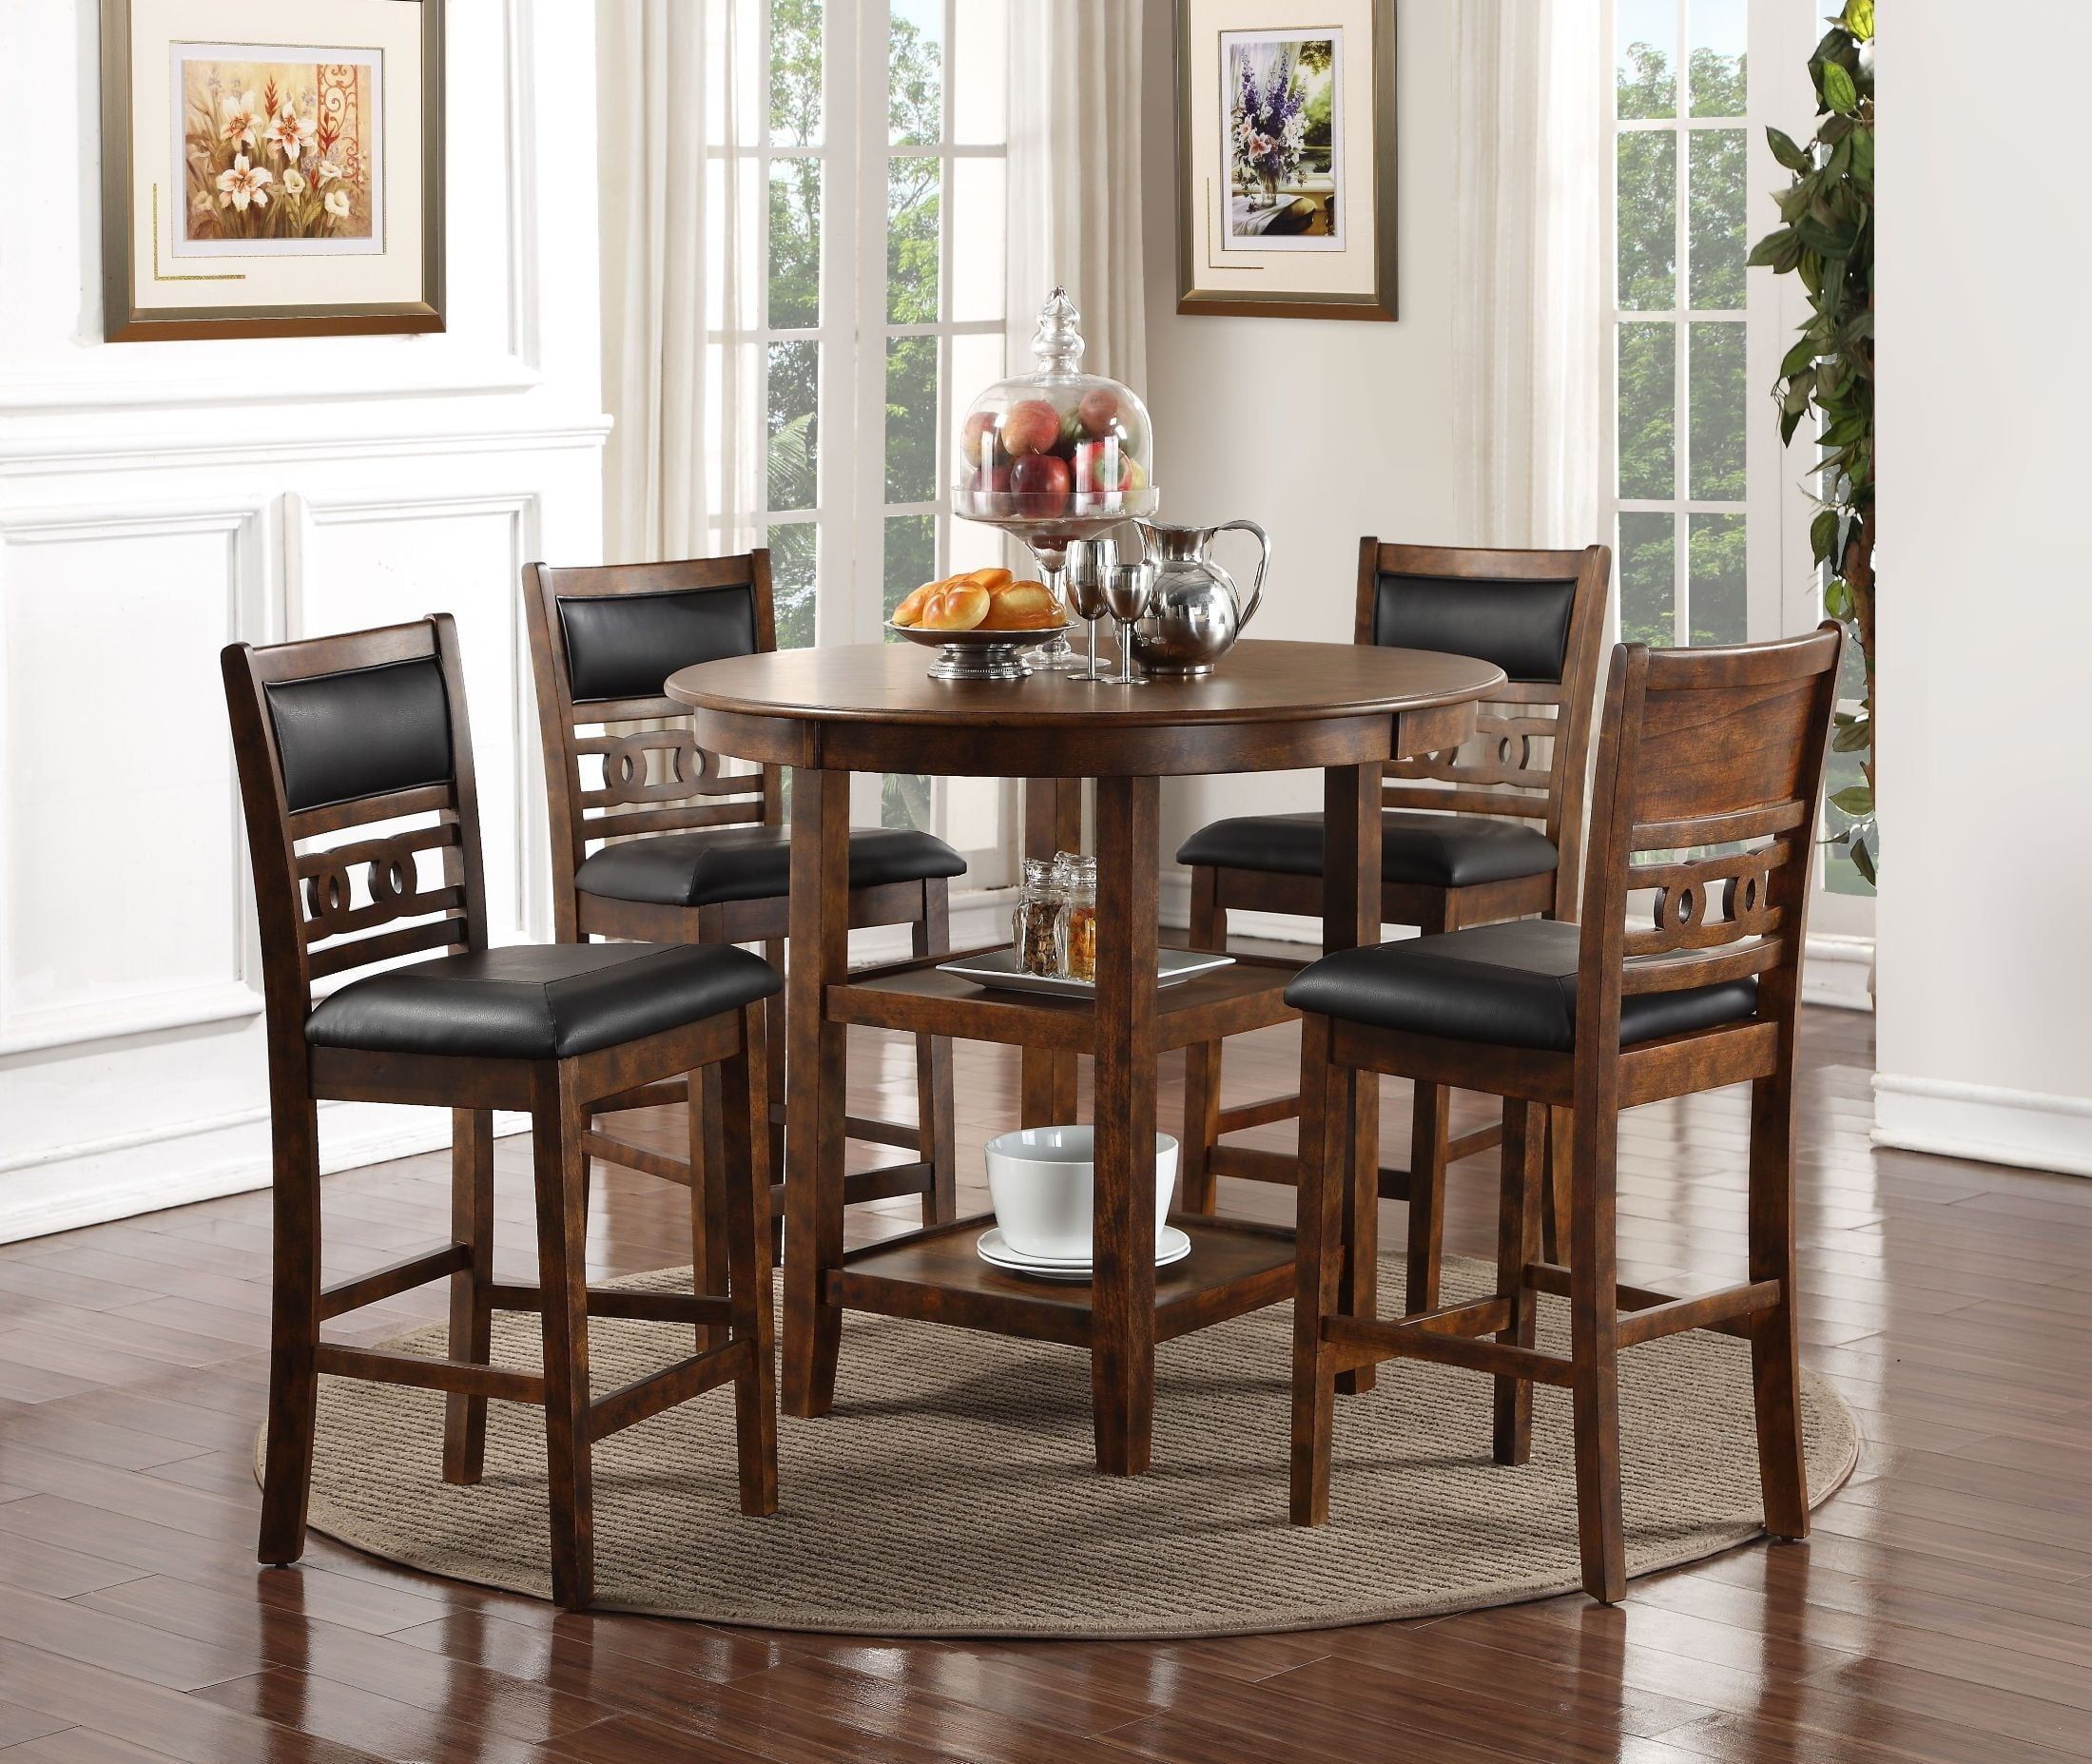 Gia Cherry 5 Piece Round Counter Height Dining Room Set From New Intended For 5 Piece Round Dining Sets (View 3 of 15)